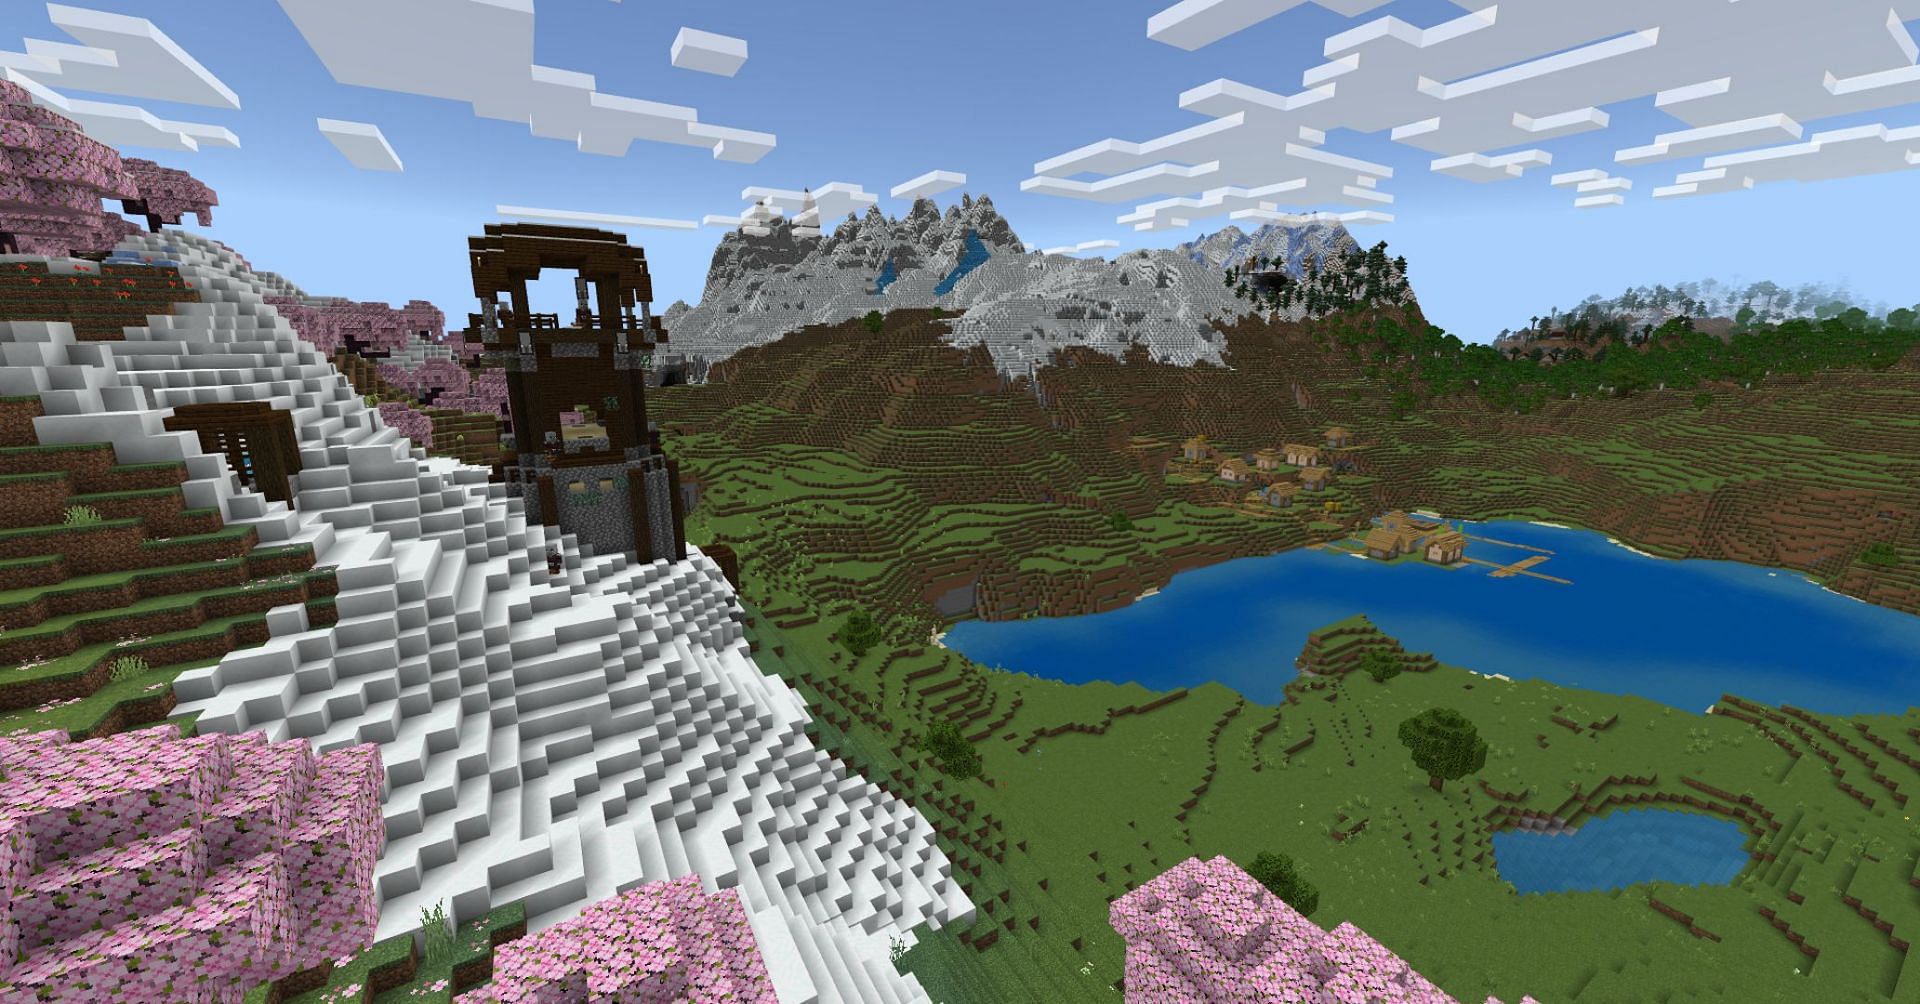 Pillager outposts tend to spawn with amazing views (Image via Mojang)